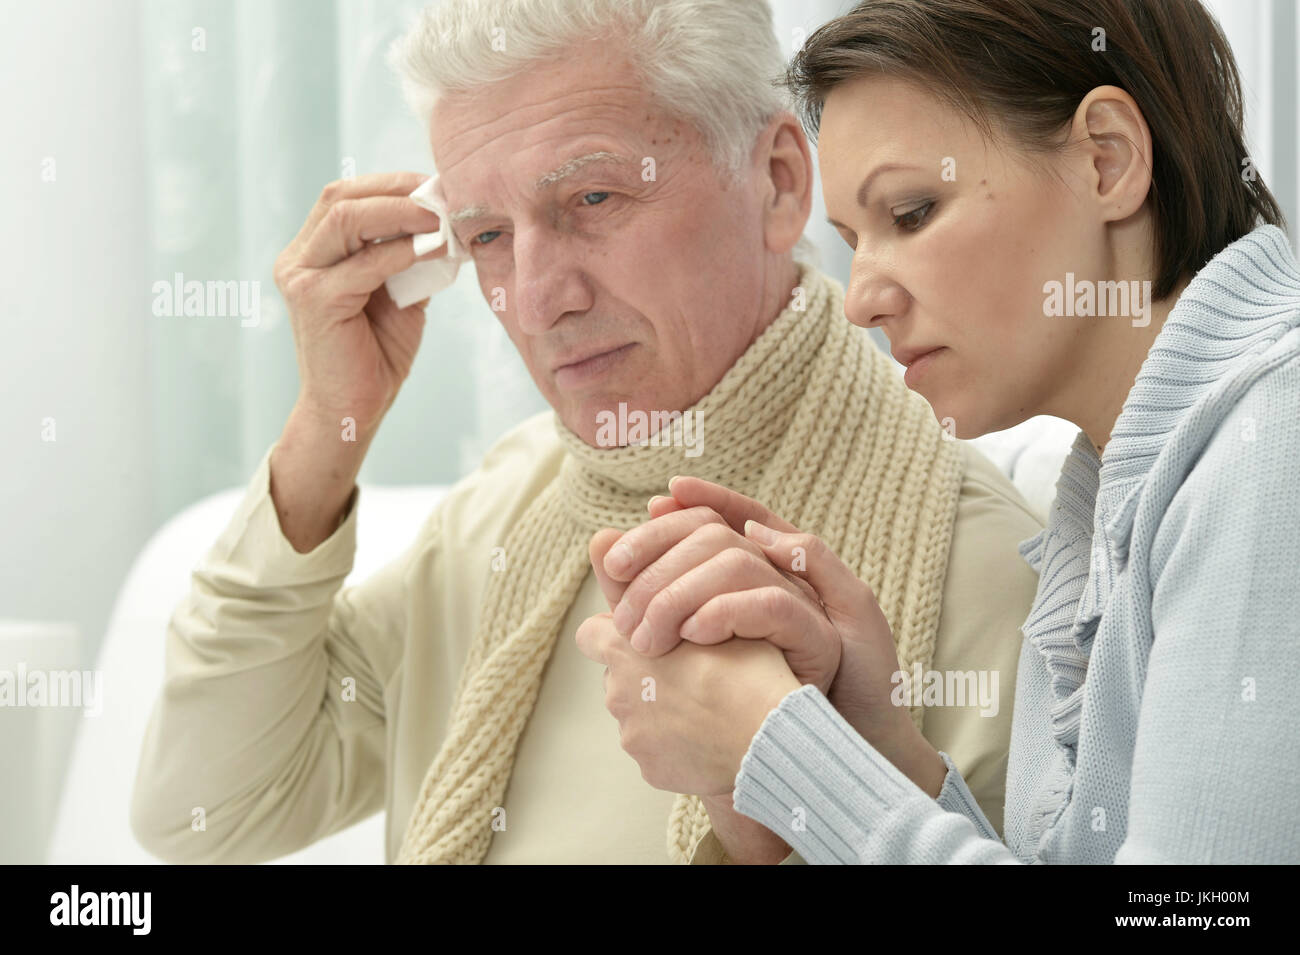 Young woman taking care of ill senior man Stock Photo